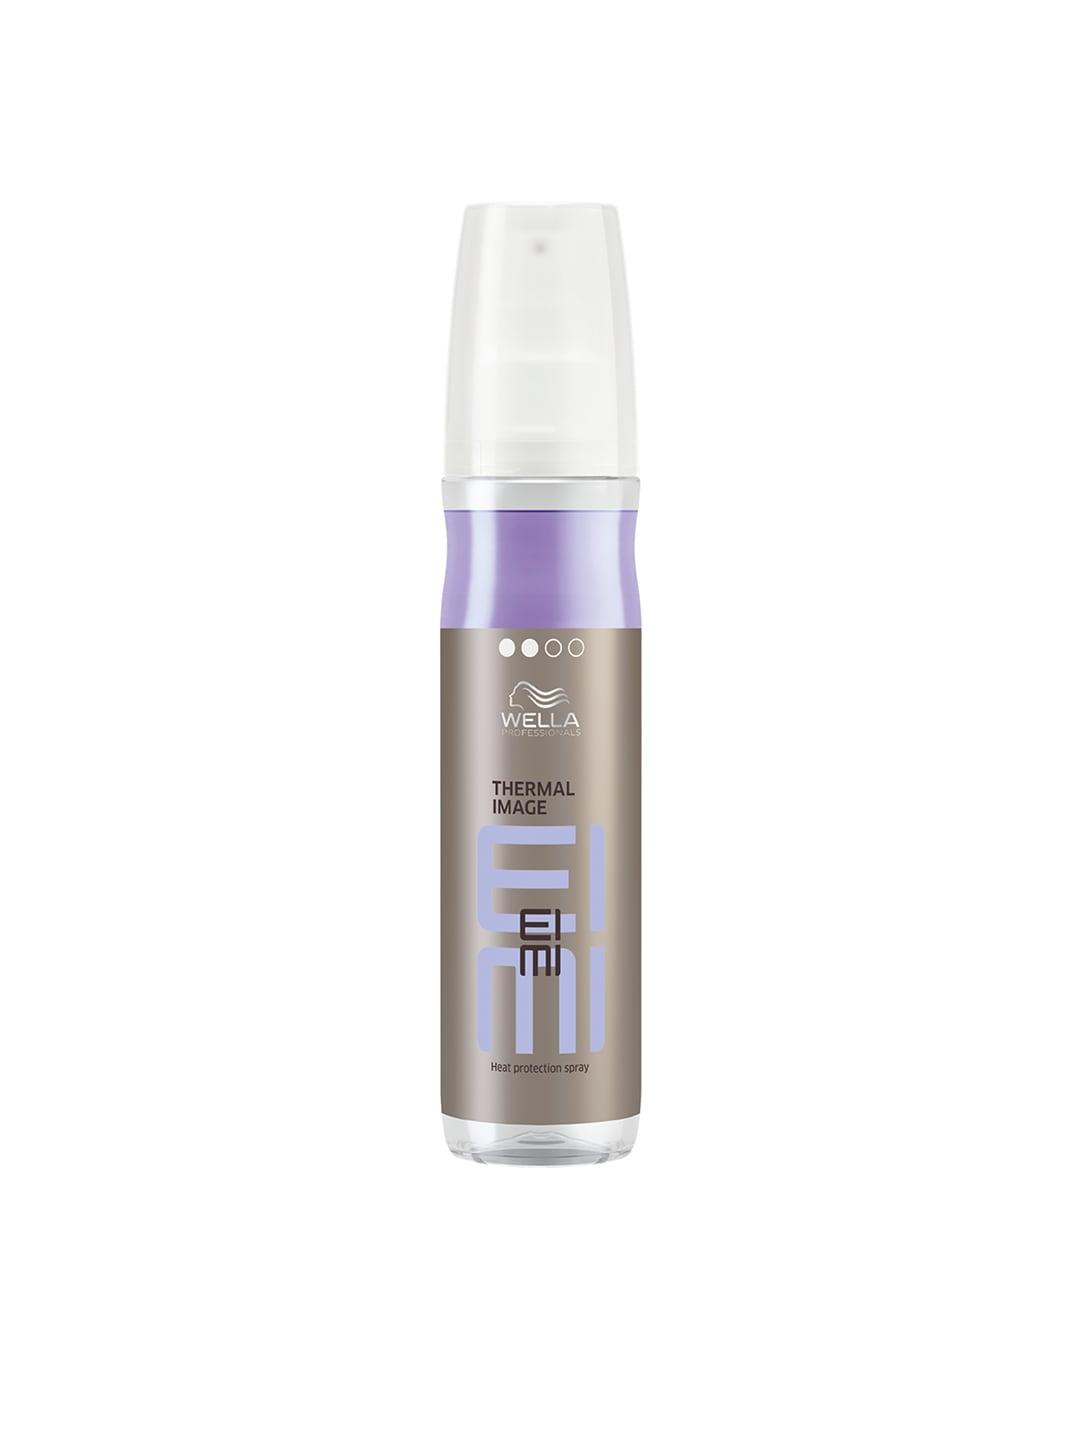 WELLA PROFESSIONALS Thermal Image Heat Protection Spray